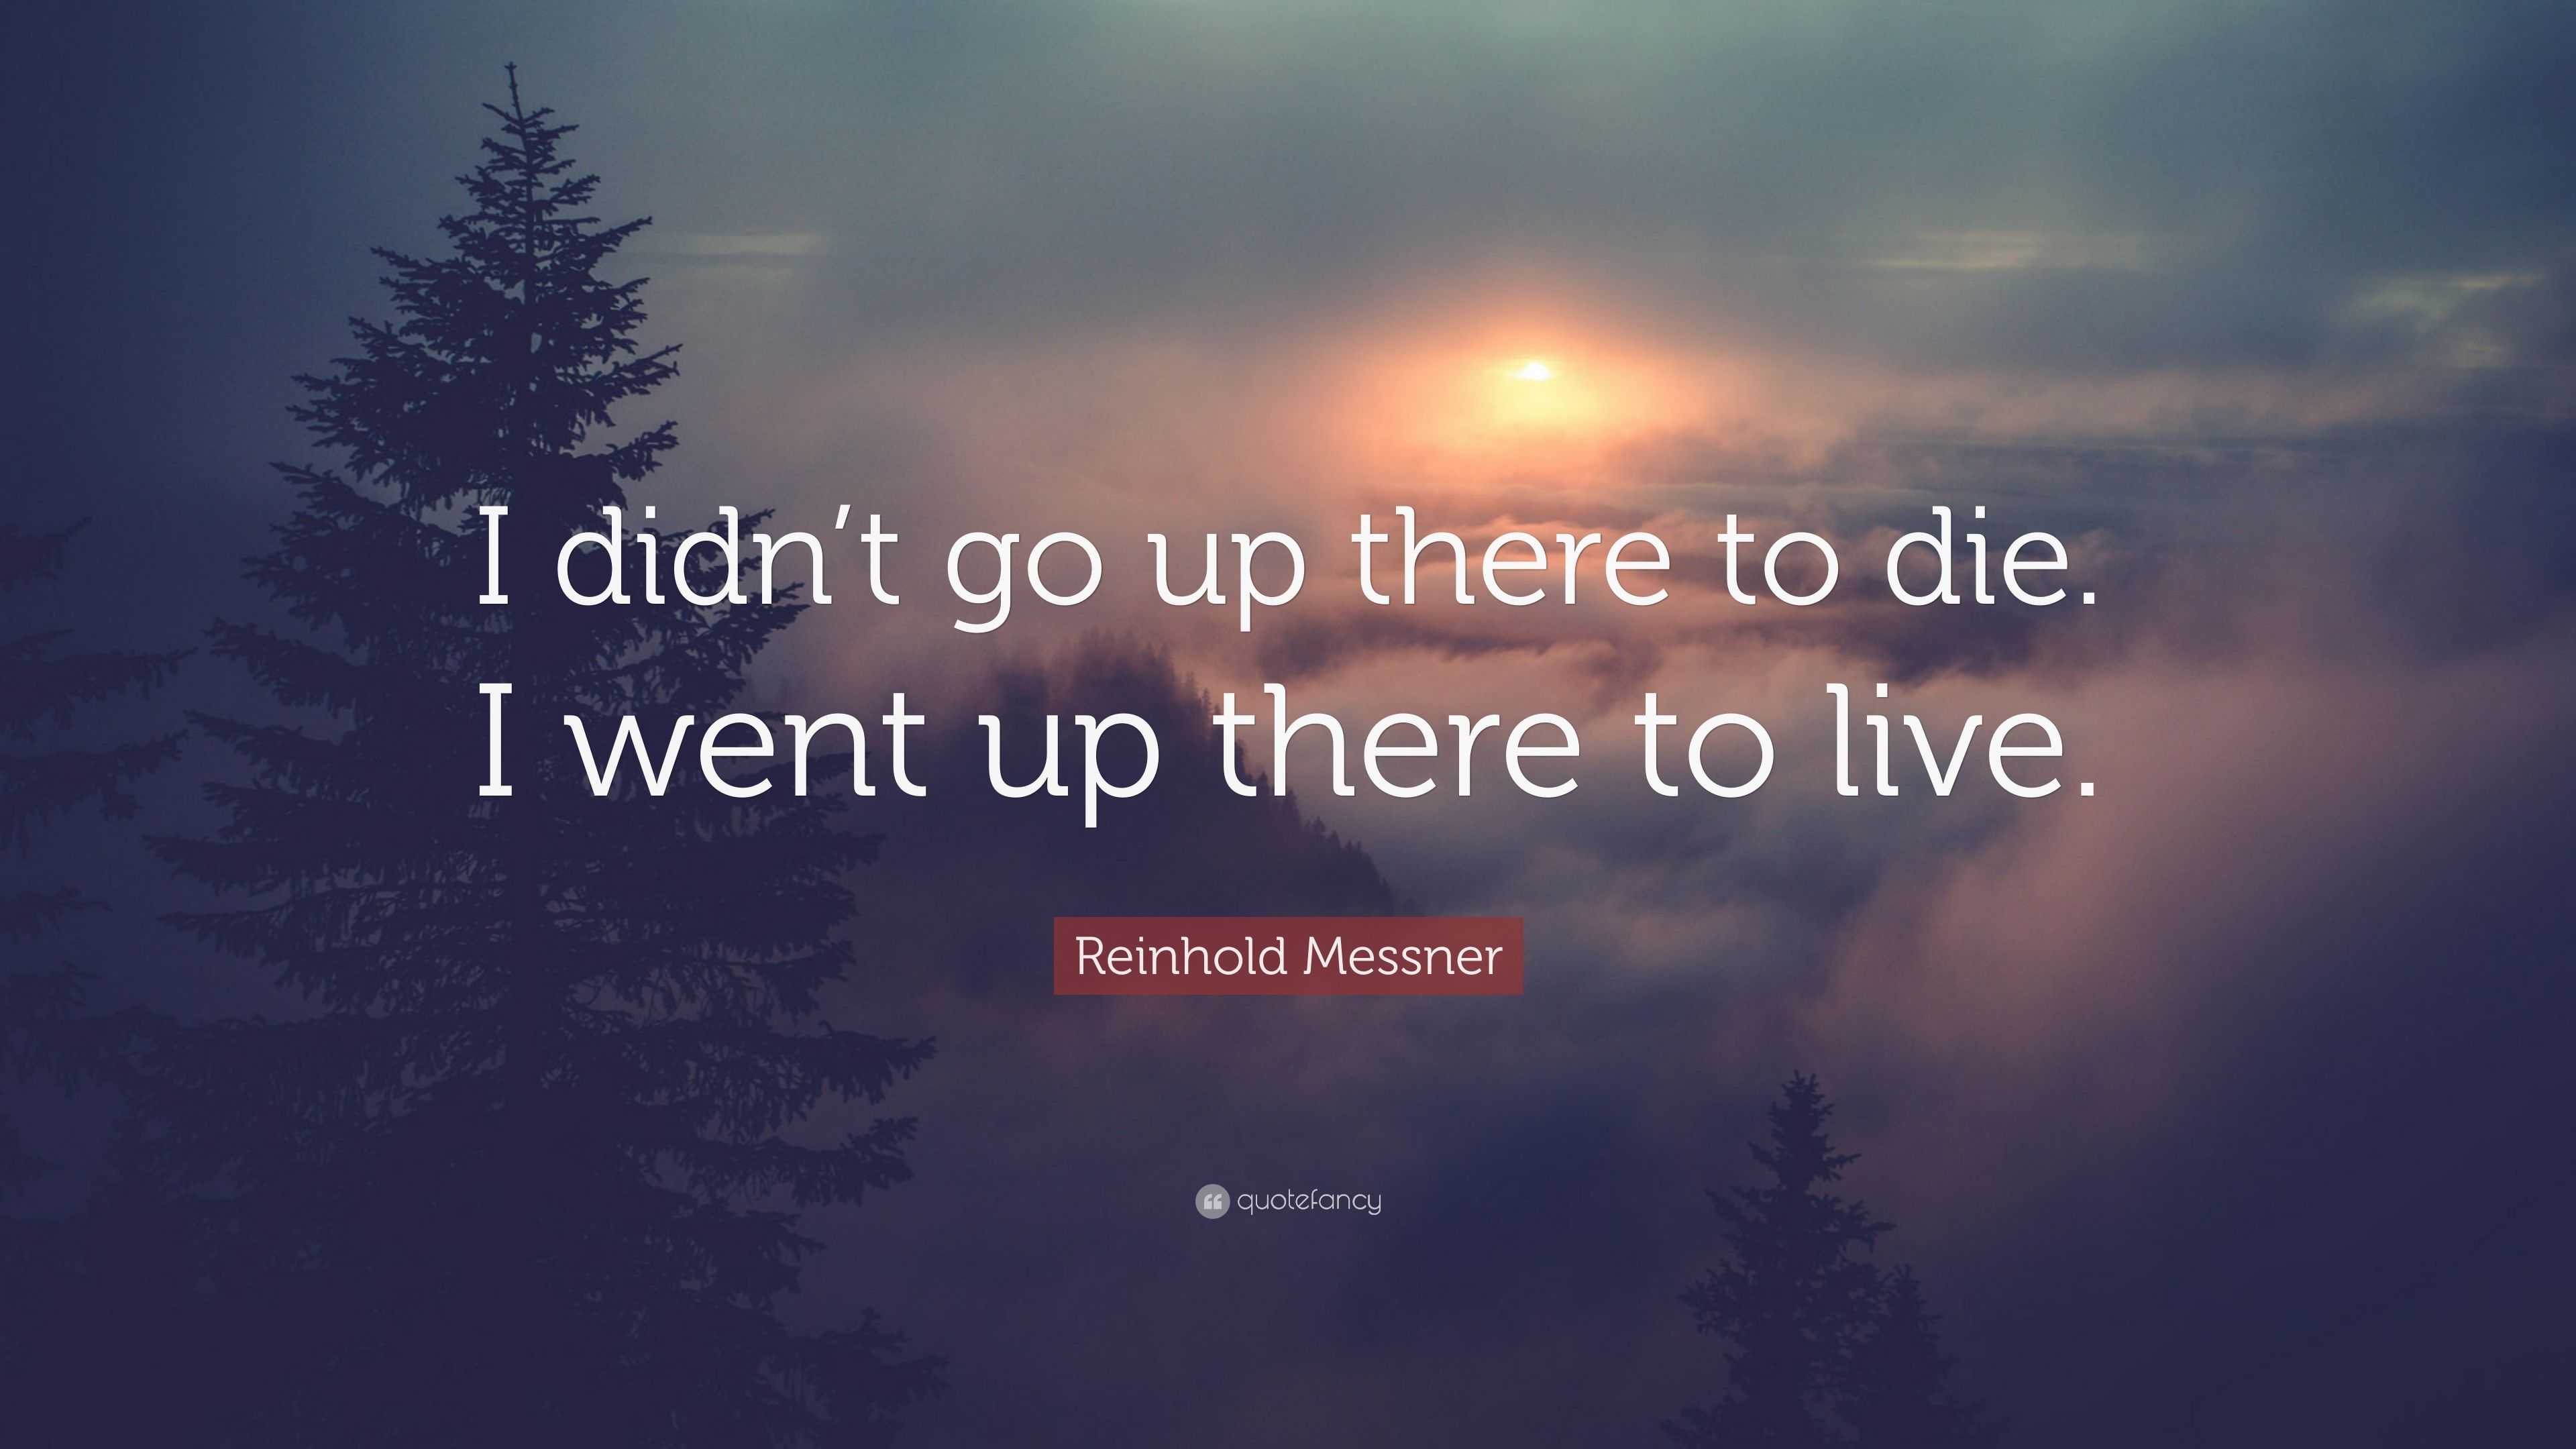 Reinhold Messner Quote: “I didn’t go up there to die. I went up there ...